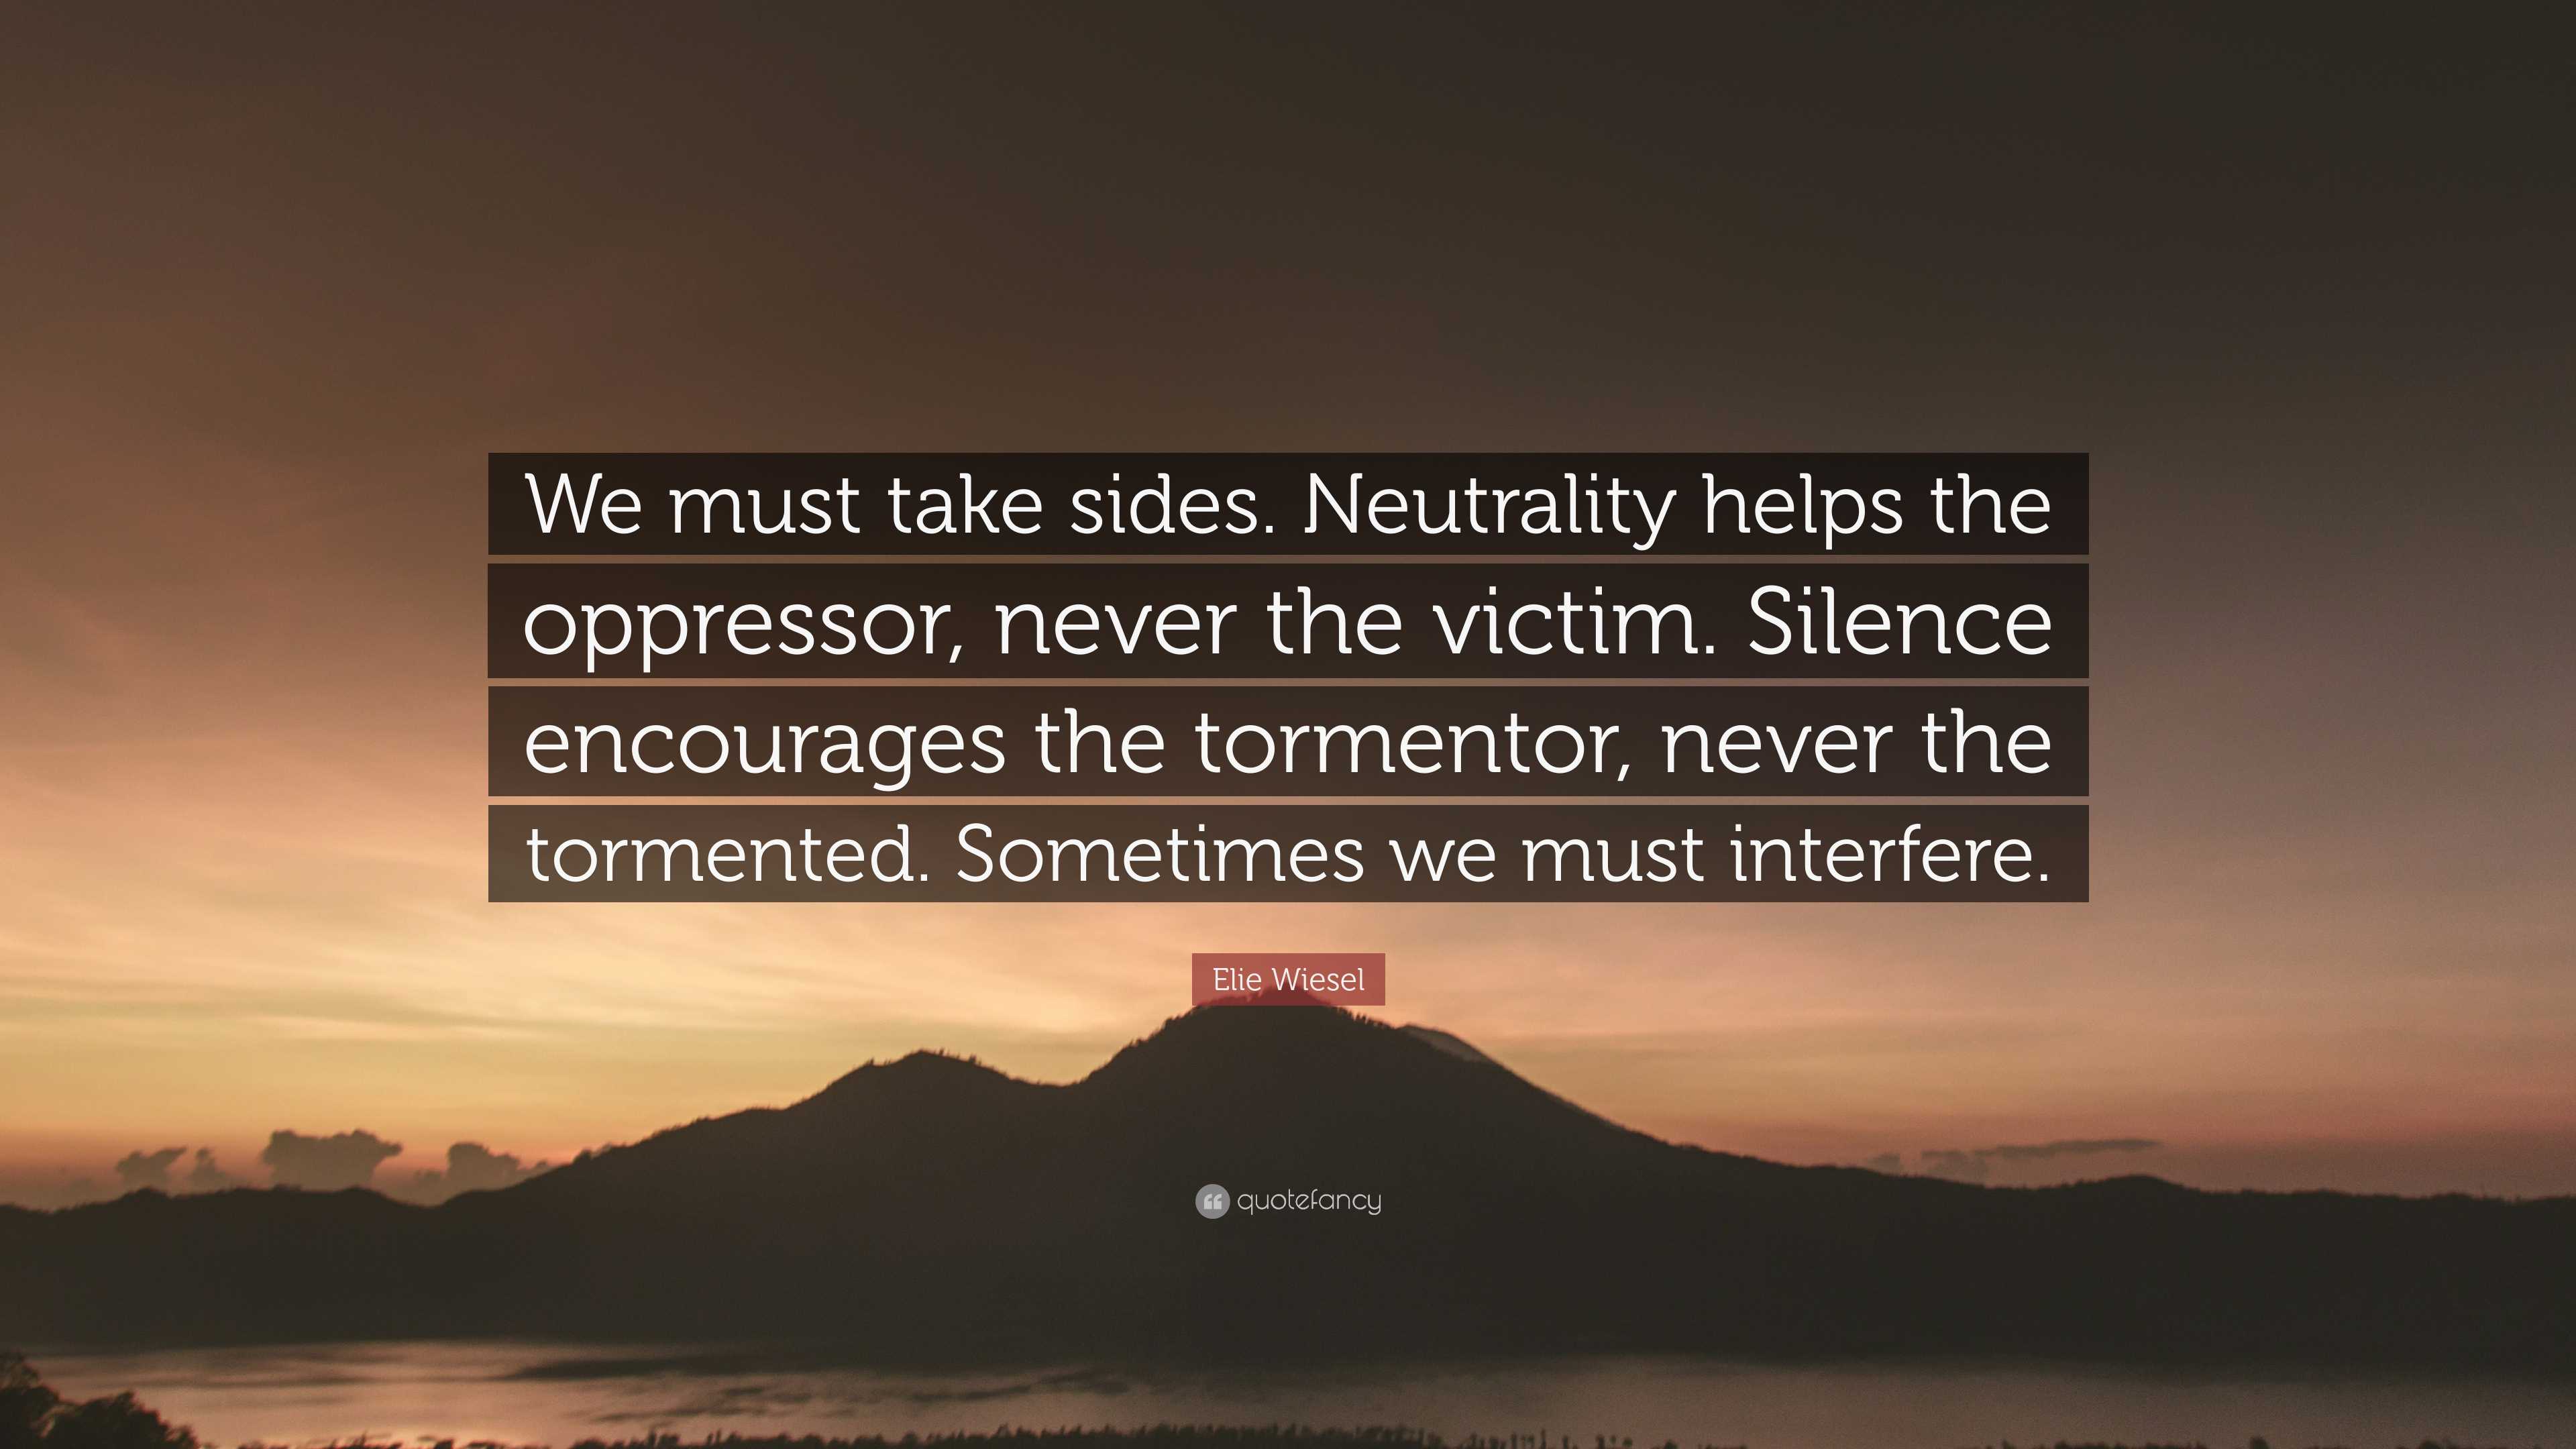 Elie Wiesel Quote: “We must take sides. Neutrality helps the oppressor ...